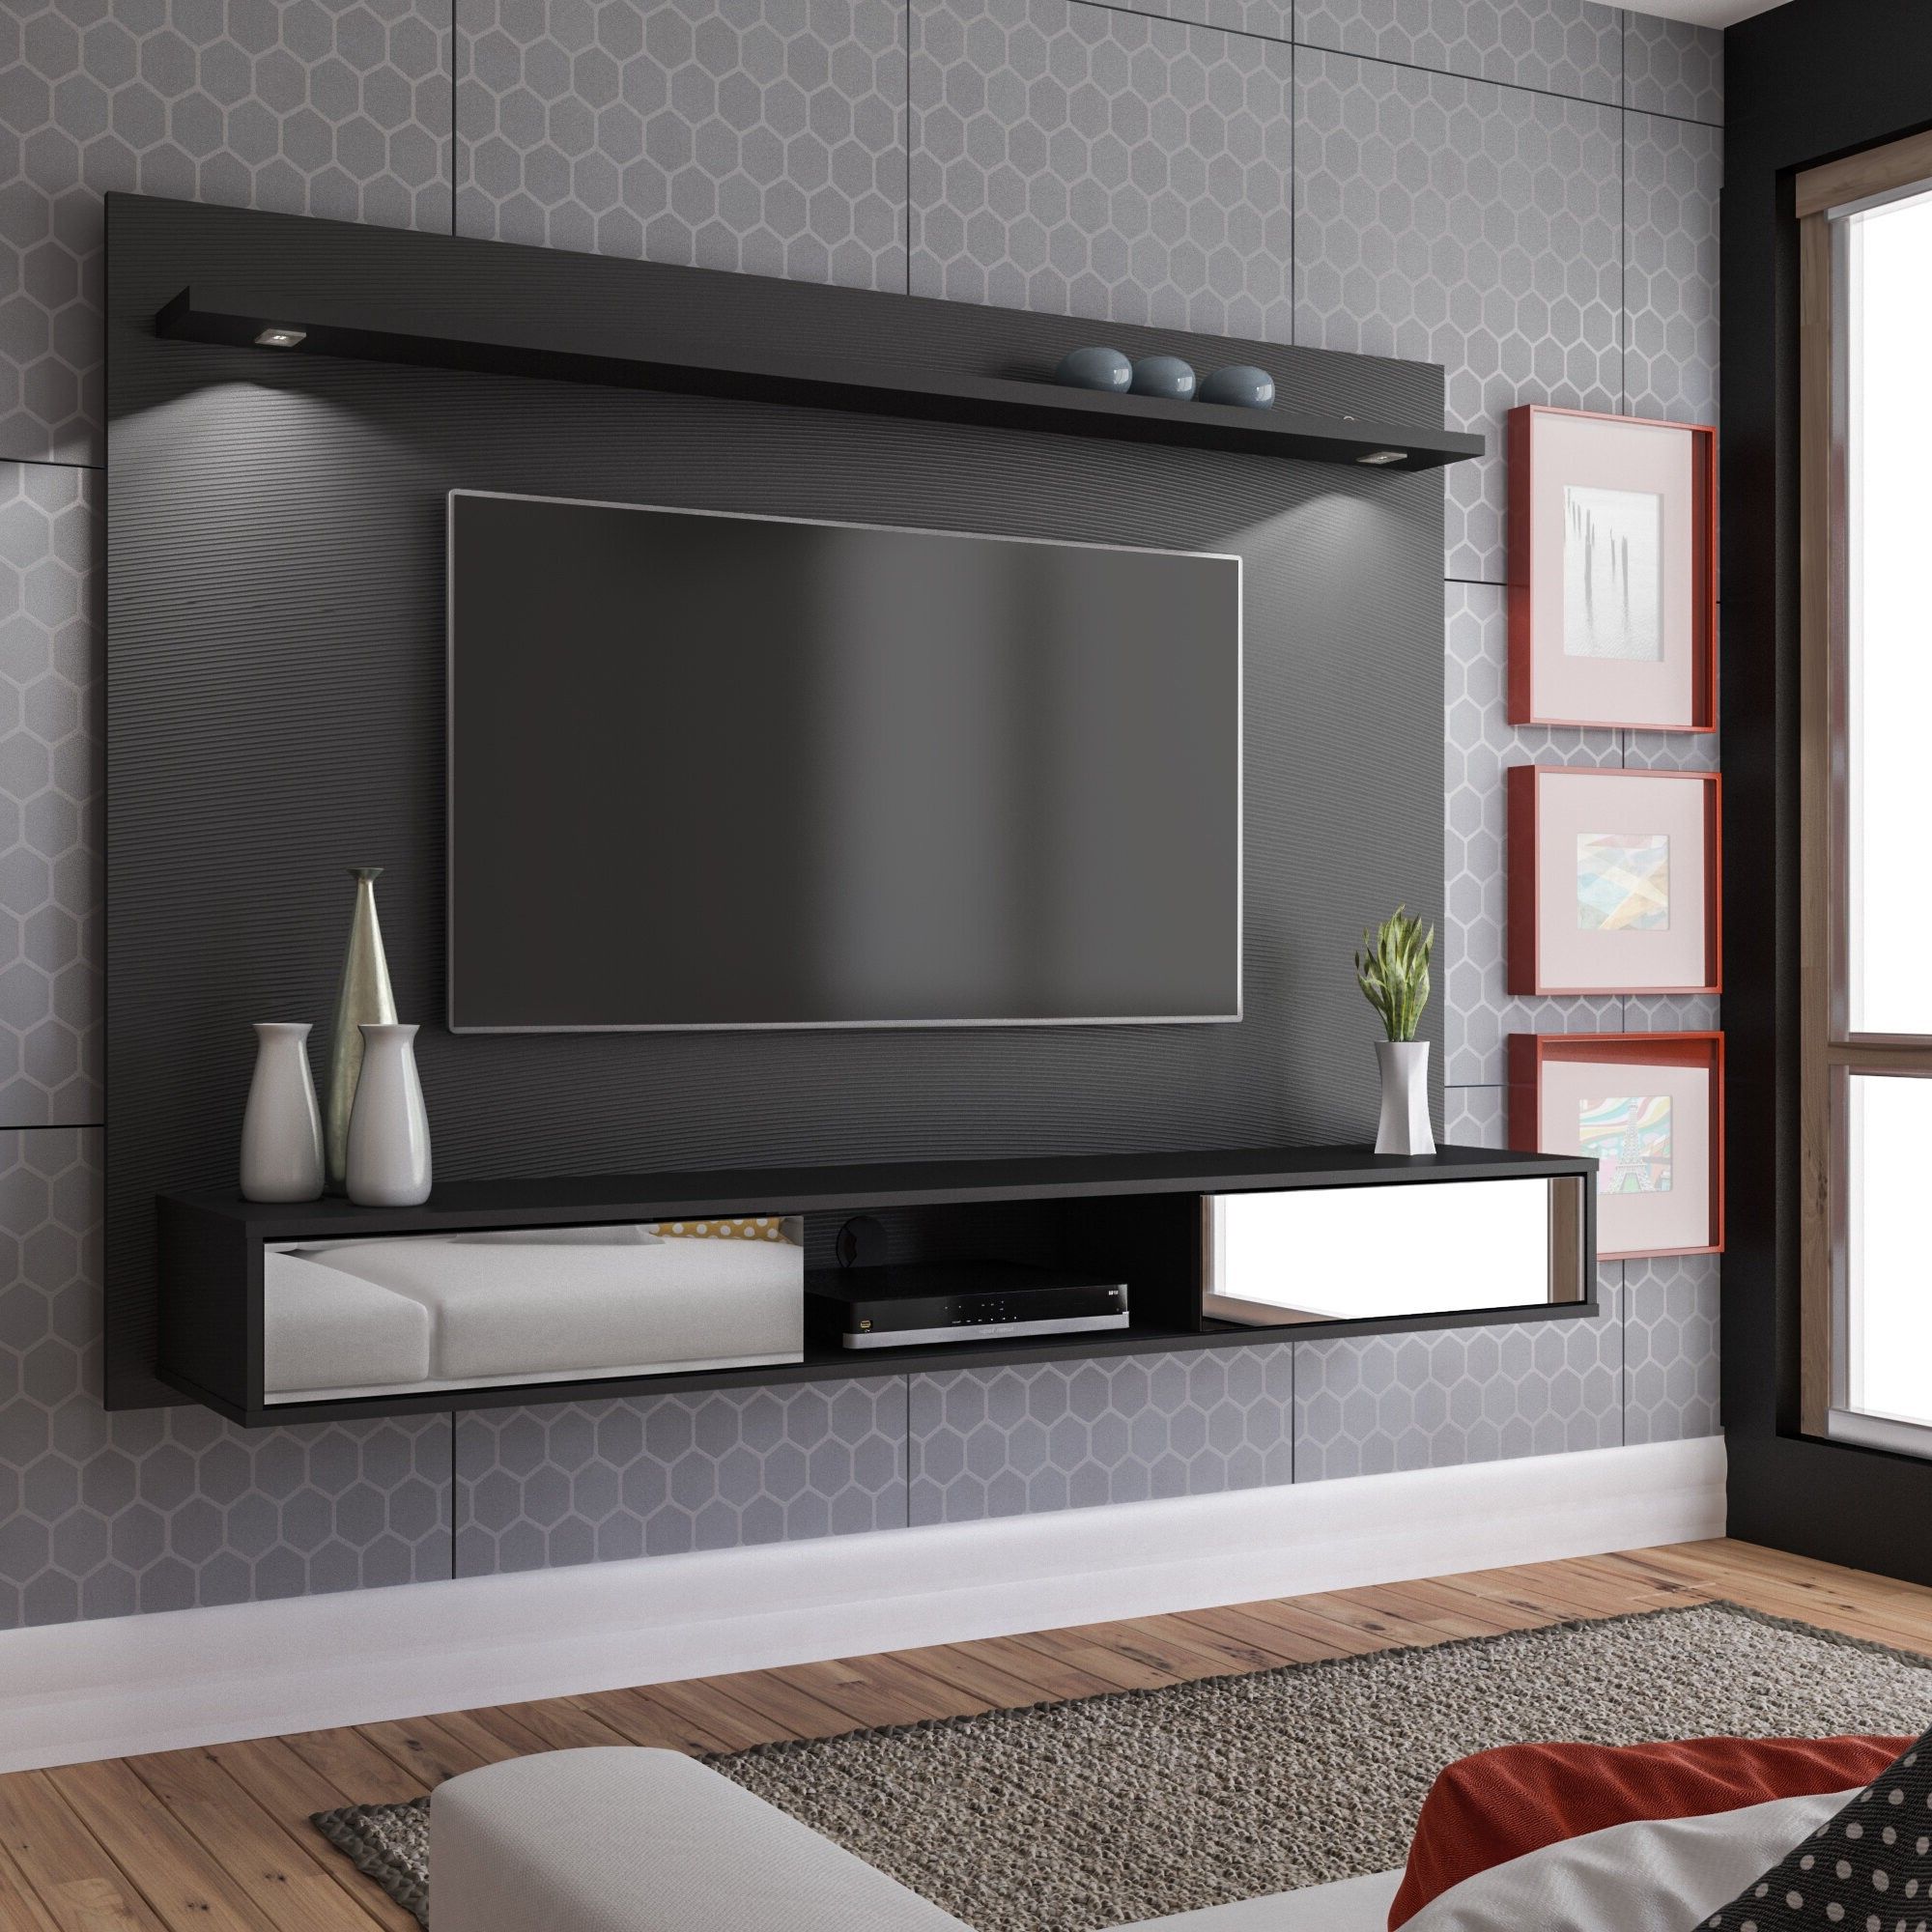 Preferred Give Your Family Room A Makeover With Minimally Designed Wooden Tv With Floating Stands For Tvs (View 7 of 15)